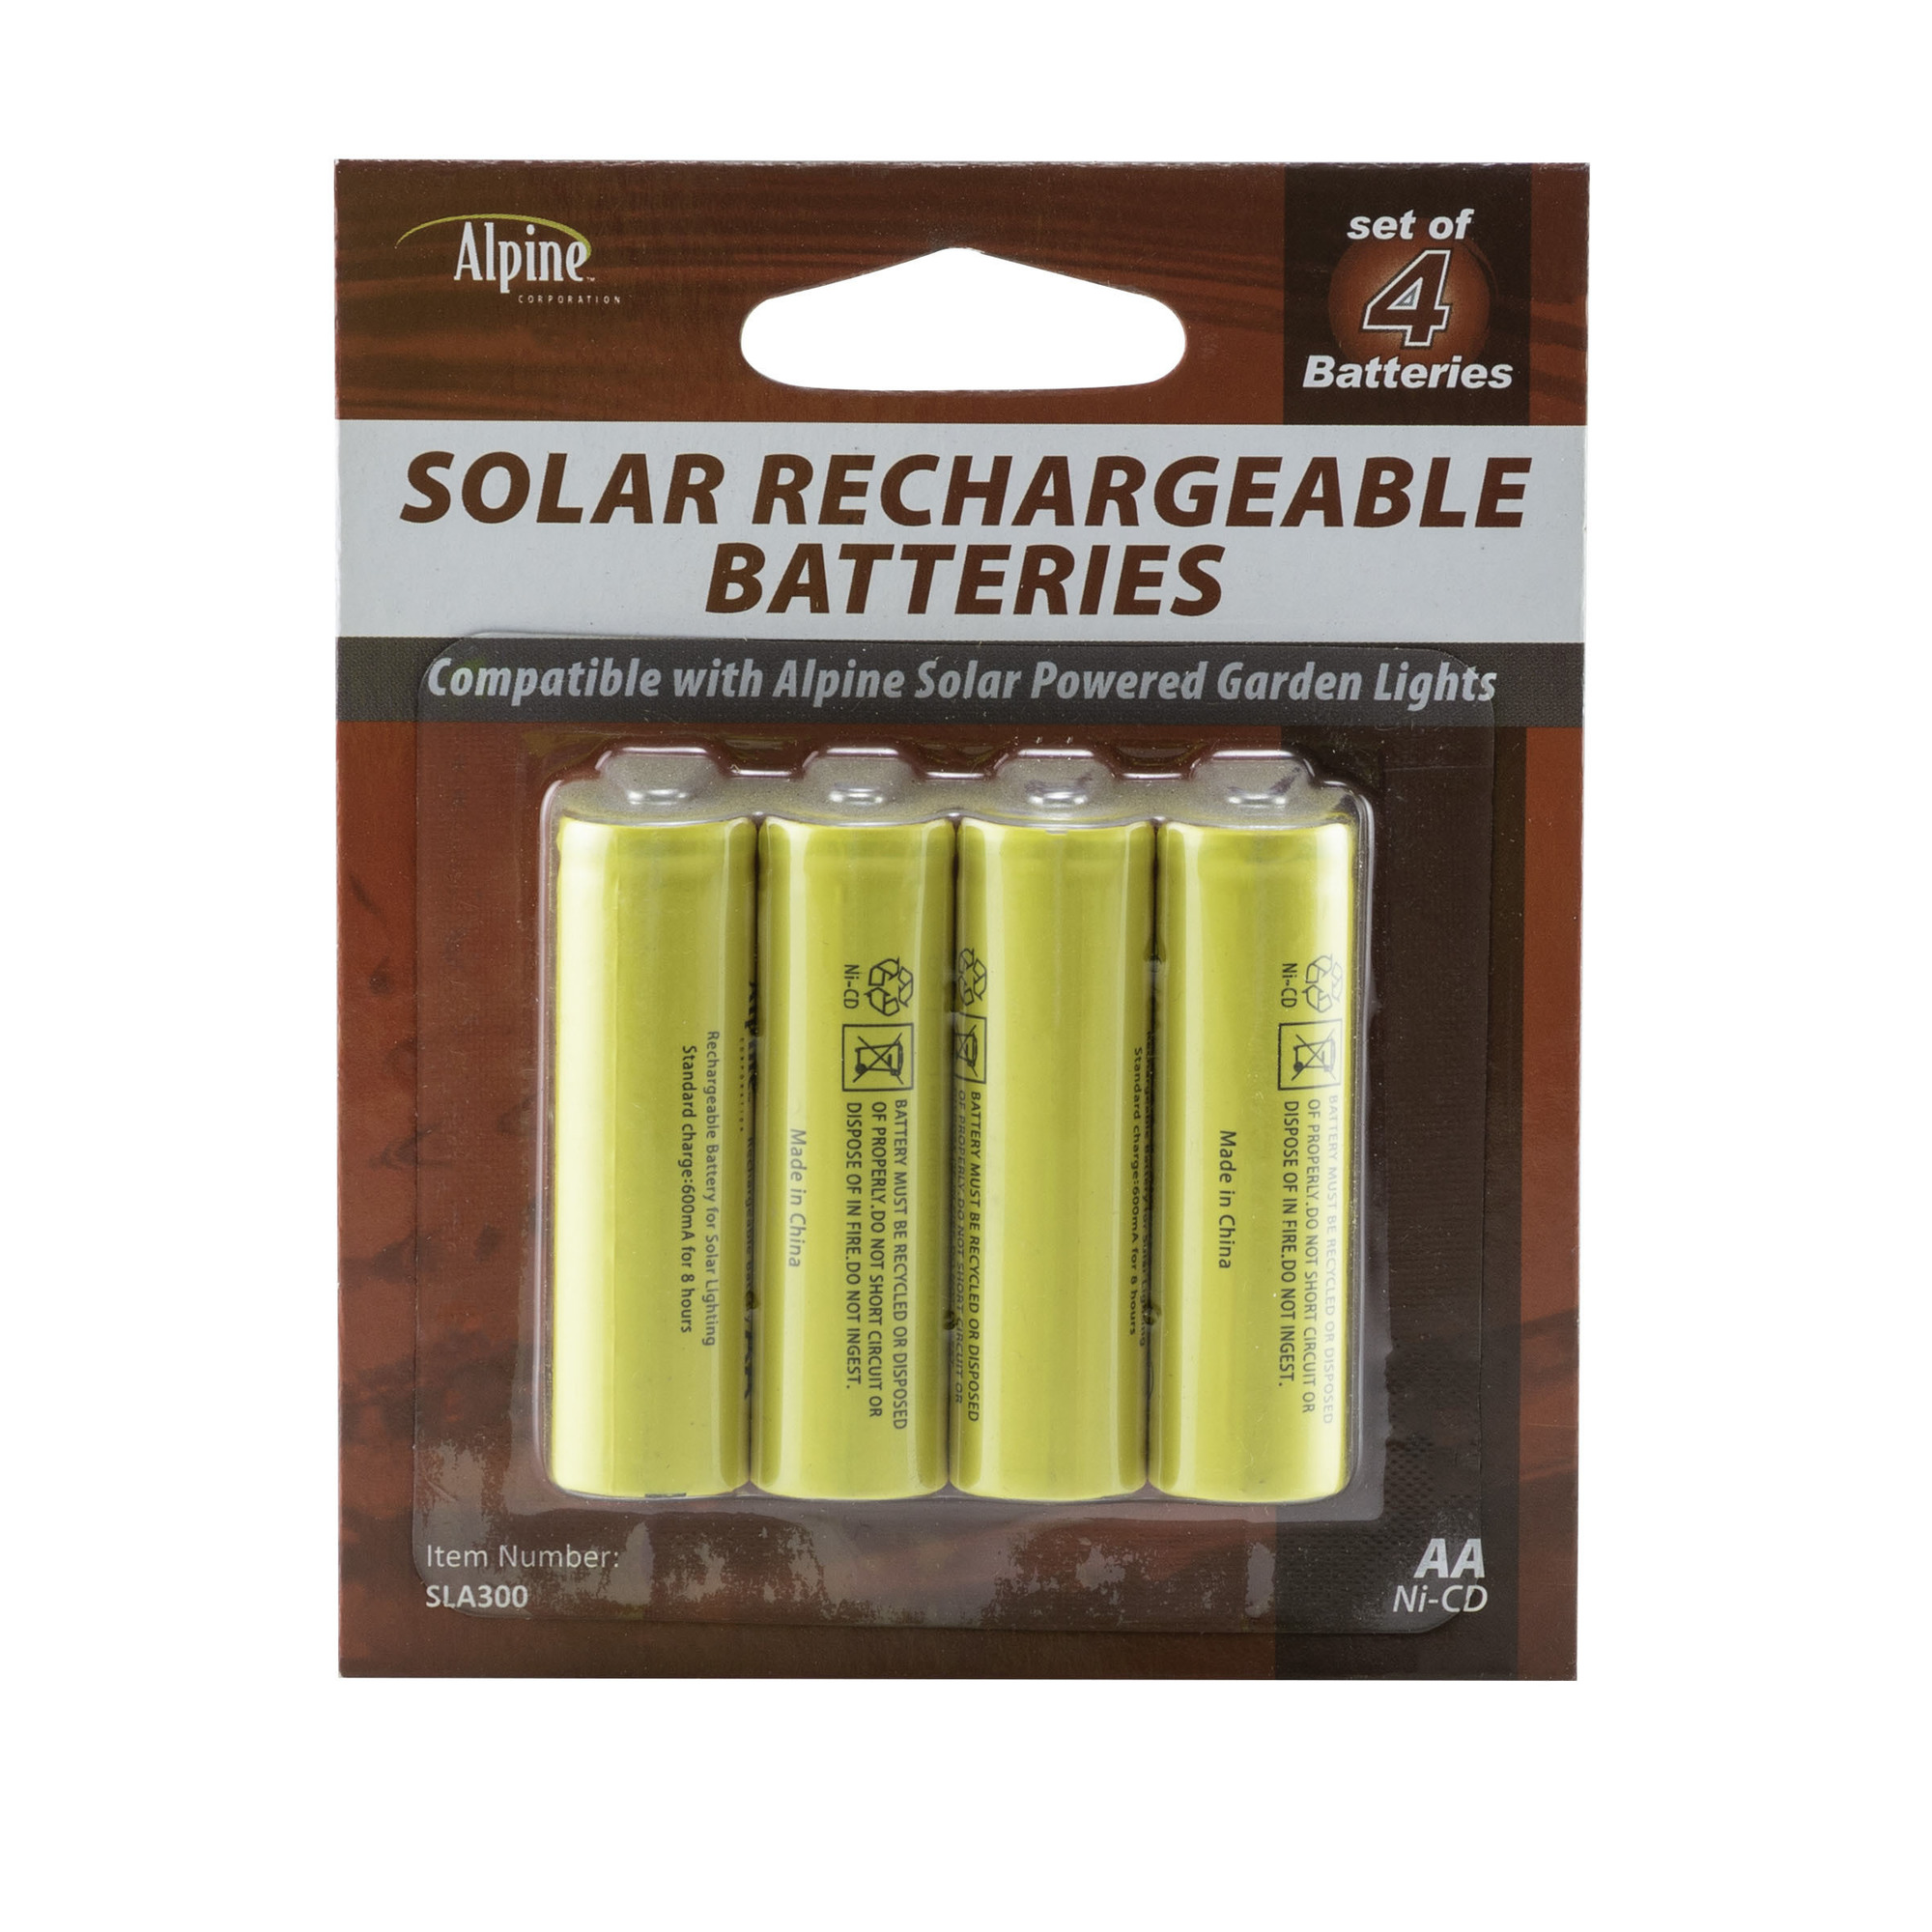 Alpine Corporation, Solar Rechargeable Batteries 4Pack(AA) Replacement, Battery Amp Hours 6 Model SLA300